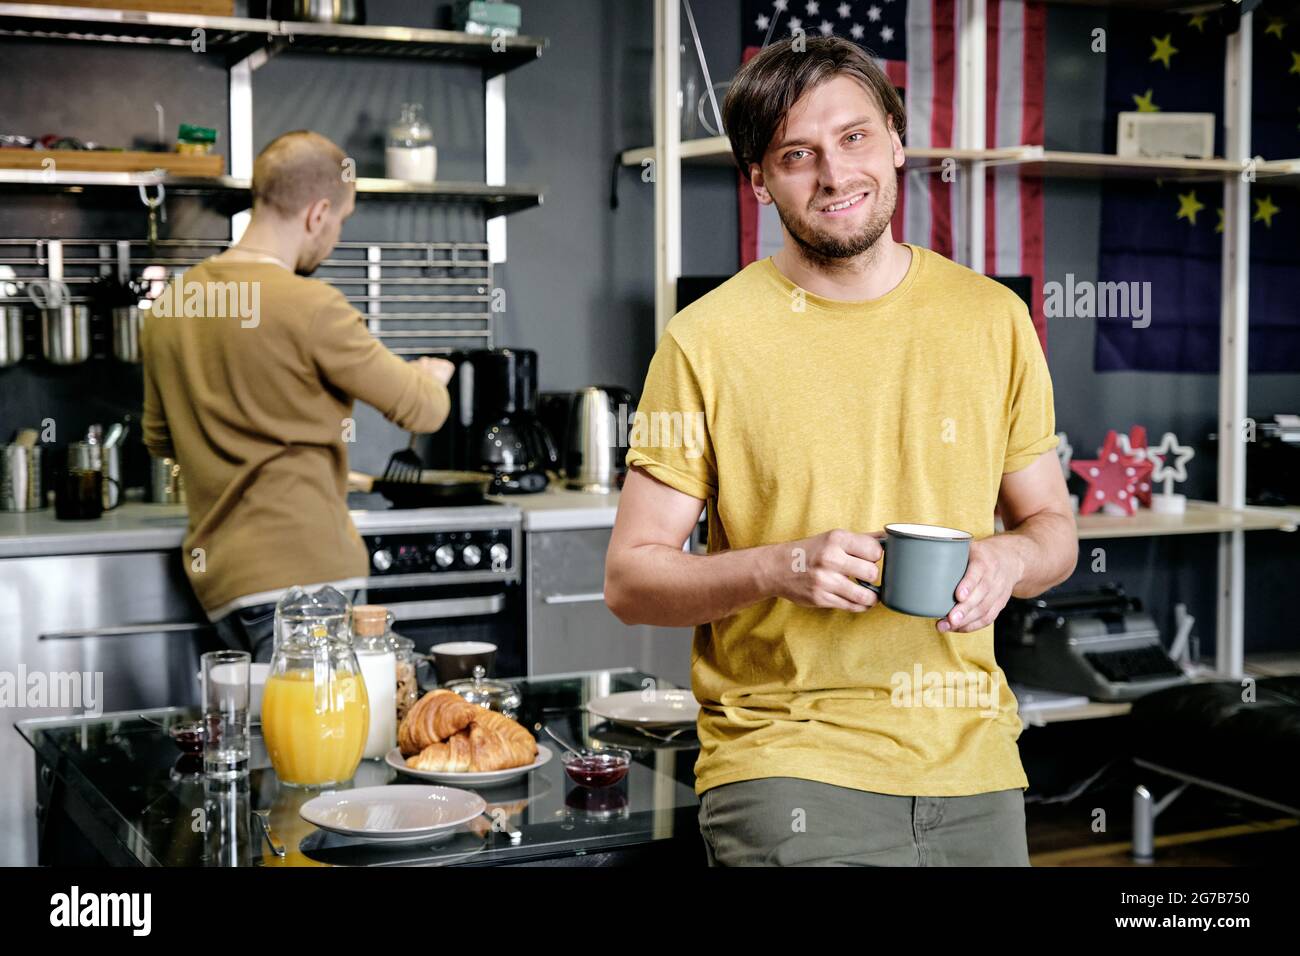 Smiling guy standing in kitchen and having drink, his husband cooking breakfast in background Stock Photo